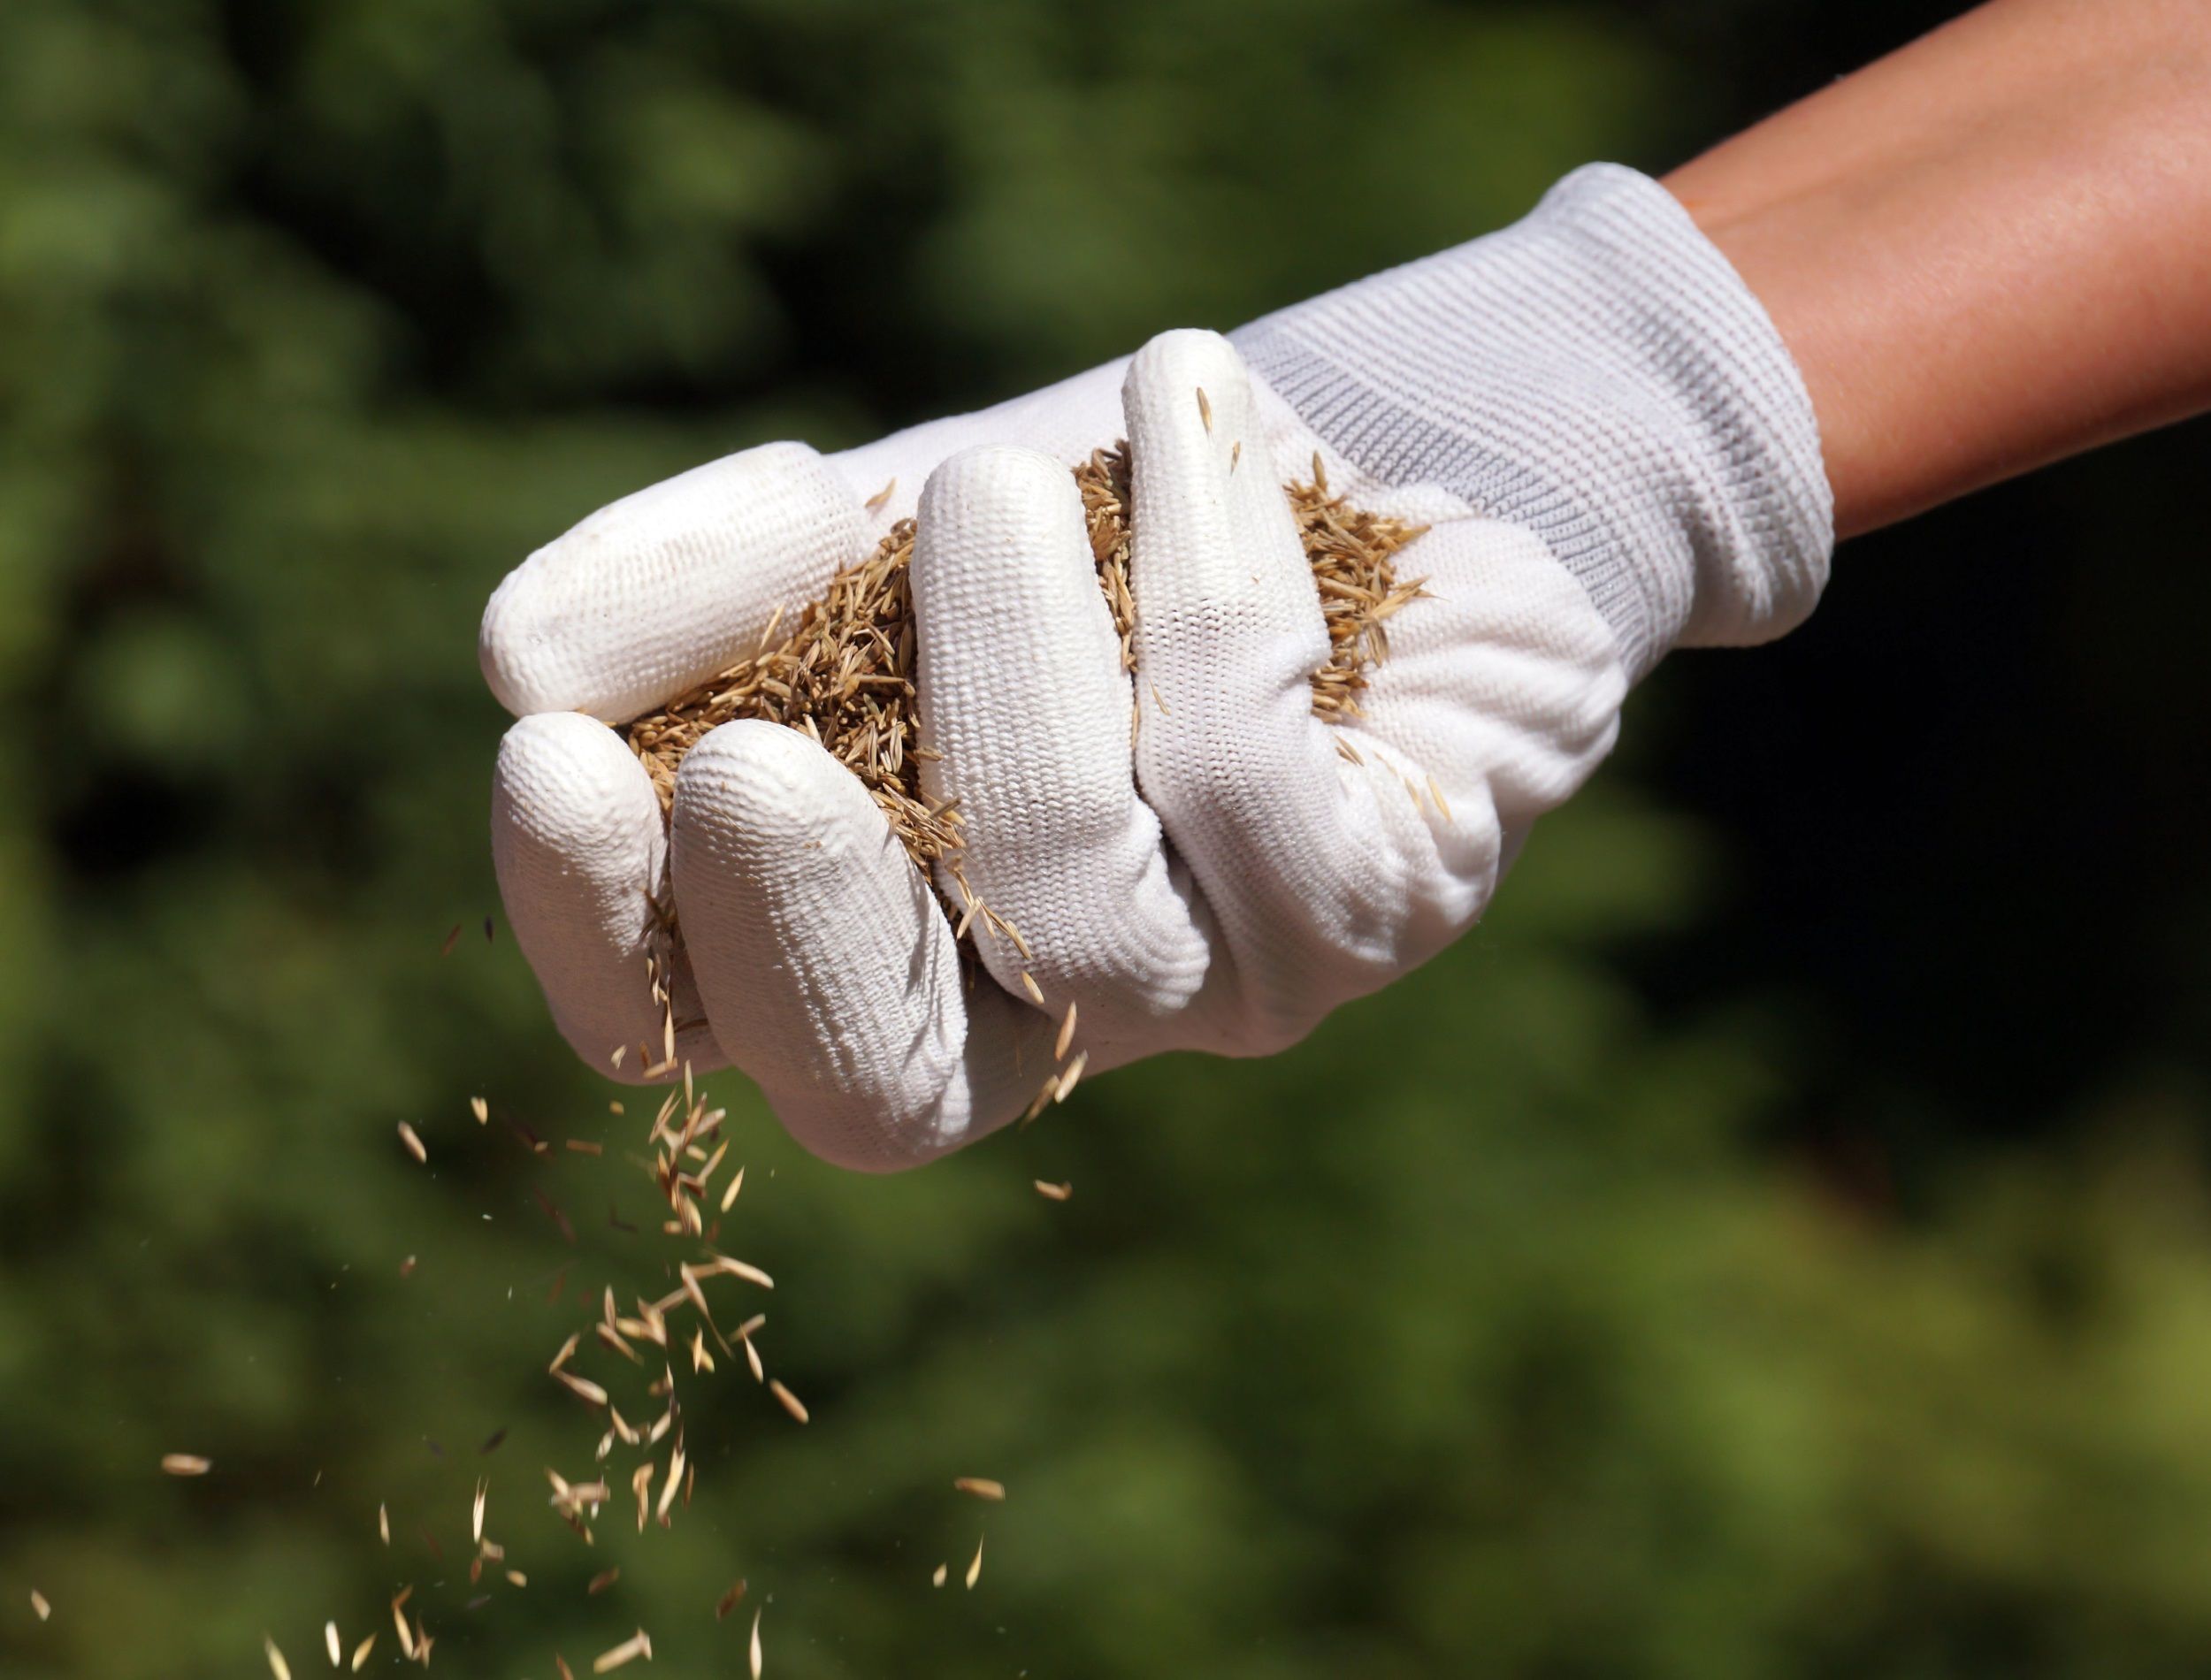 Establishing a lawn. A female gloved hand sowing grass seeds.